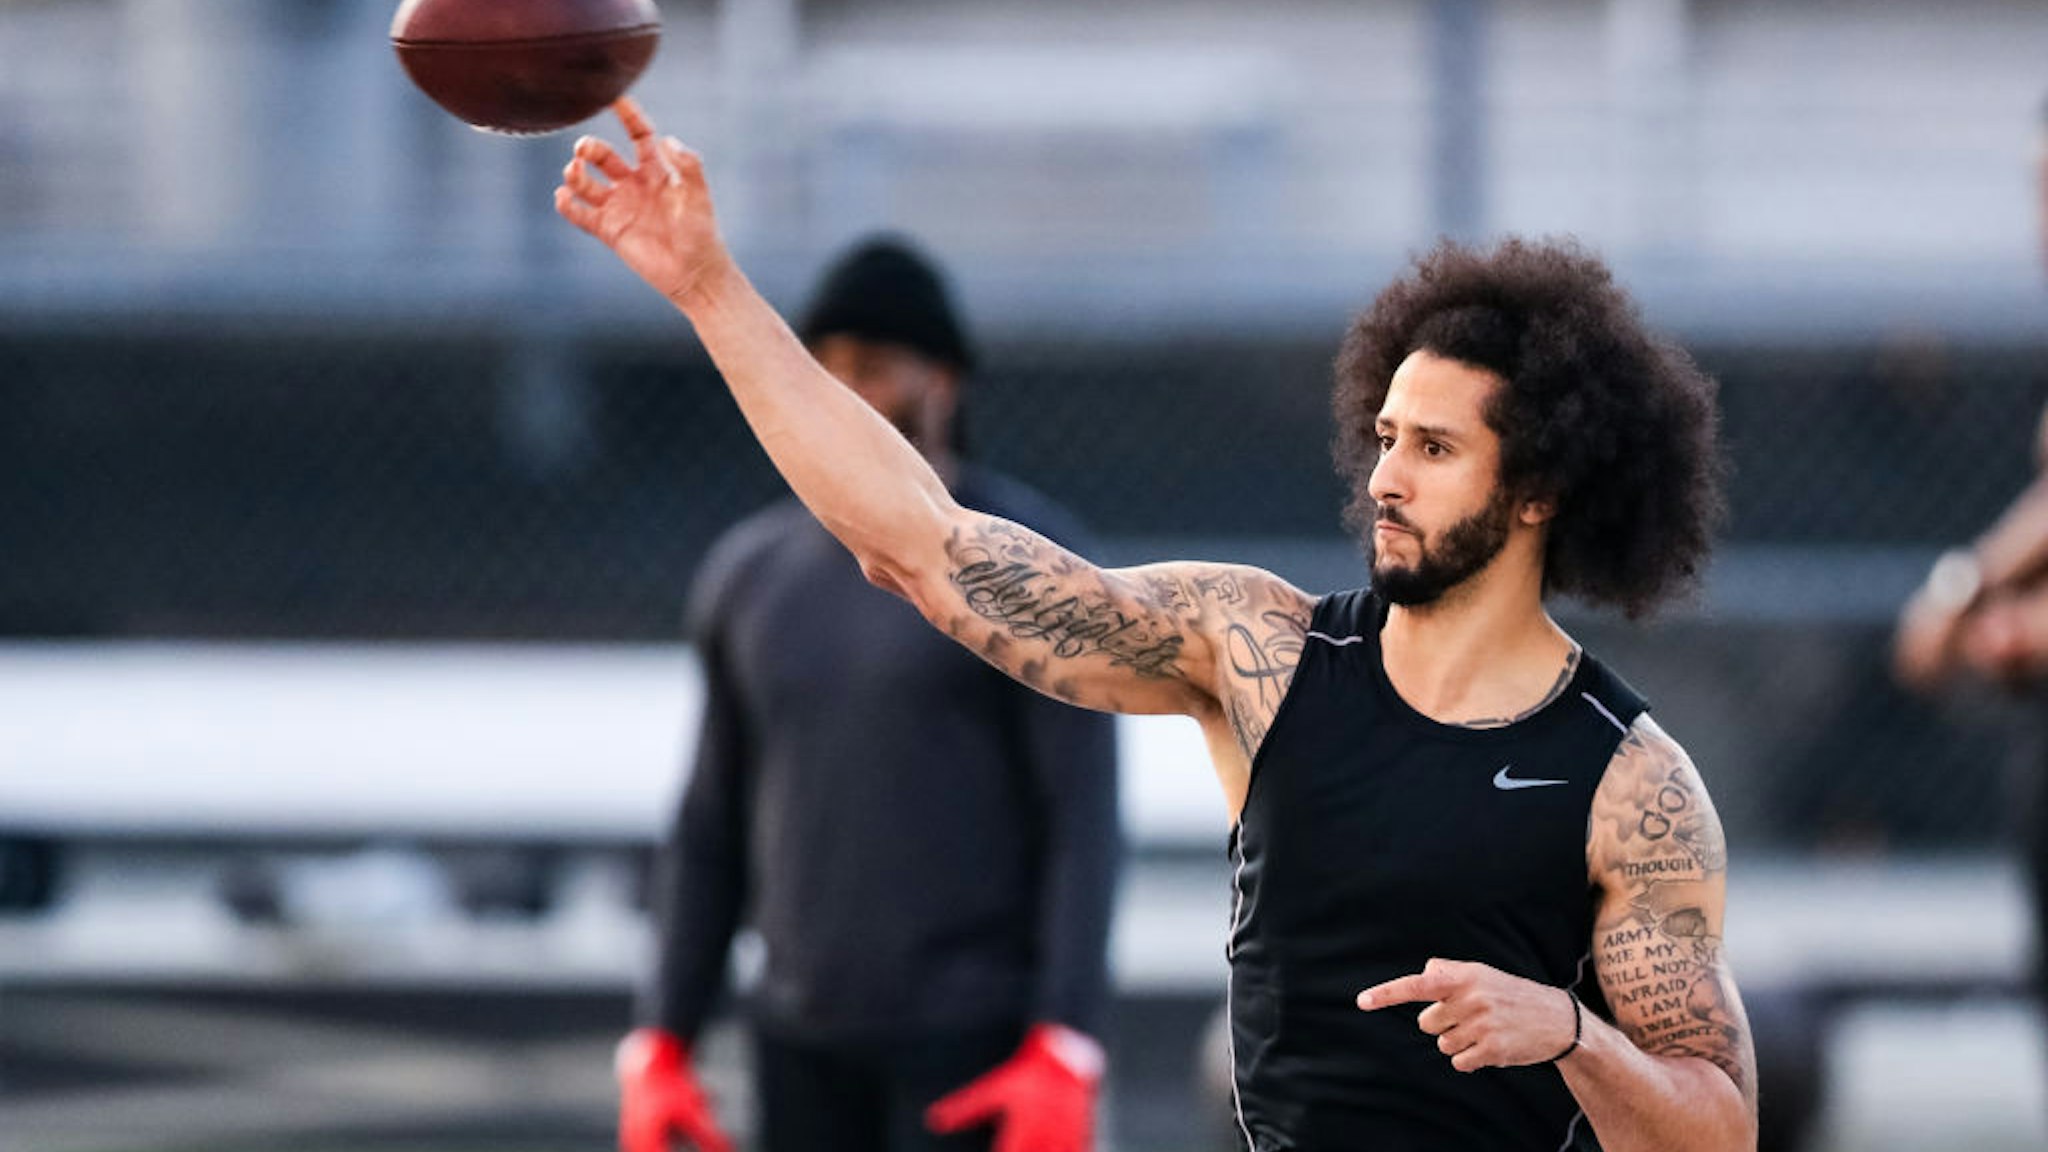 Colin Kaepernick looks to pass during his NFL workout held at Charles R Drew high school on November 16, 2019 in Riverdale, Georgia.